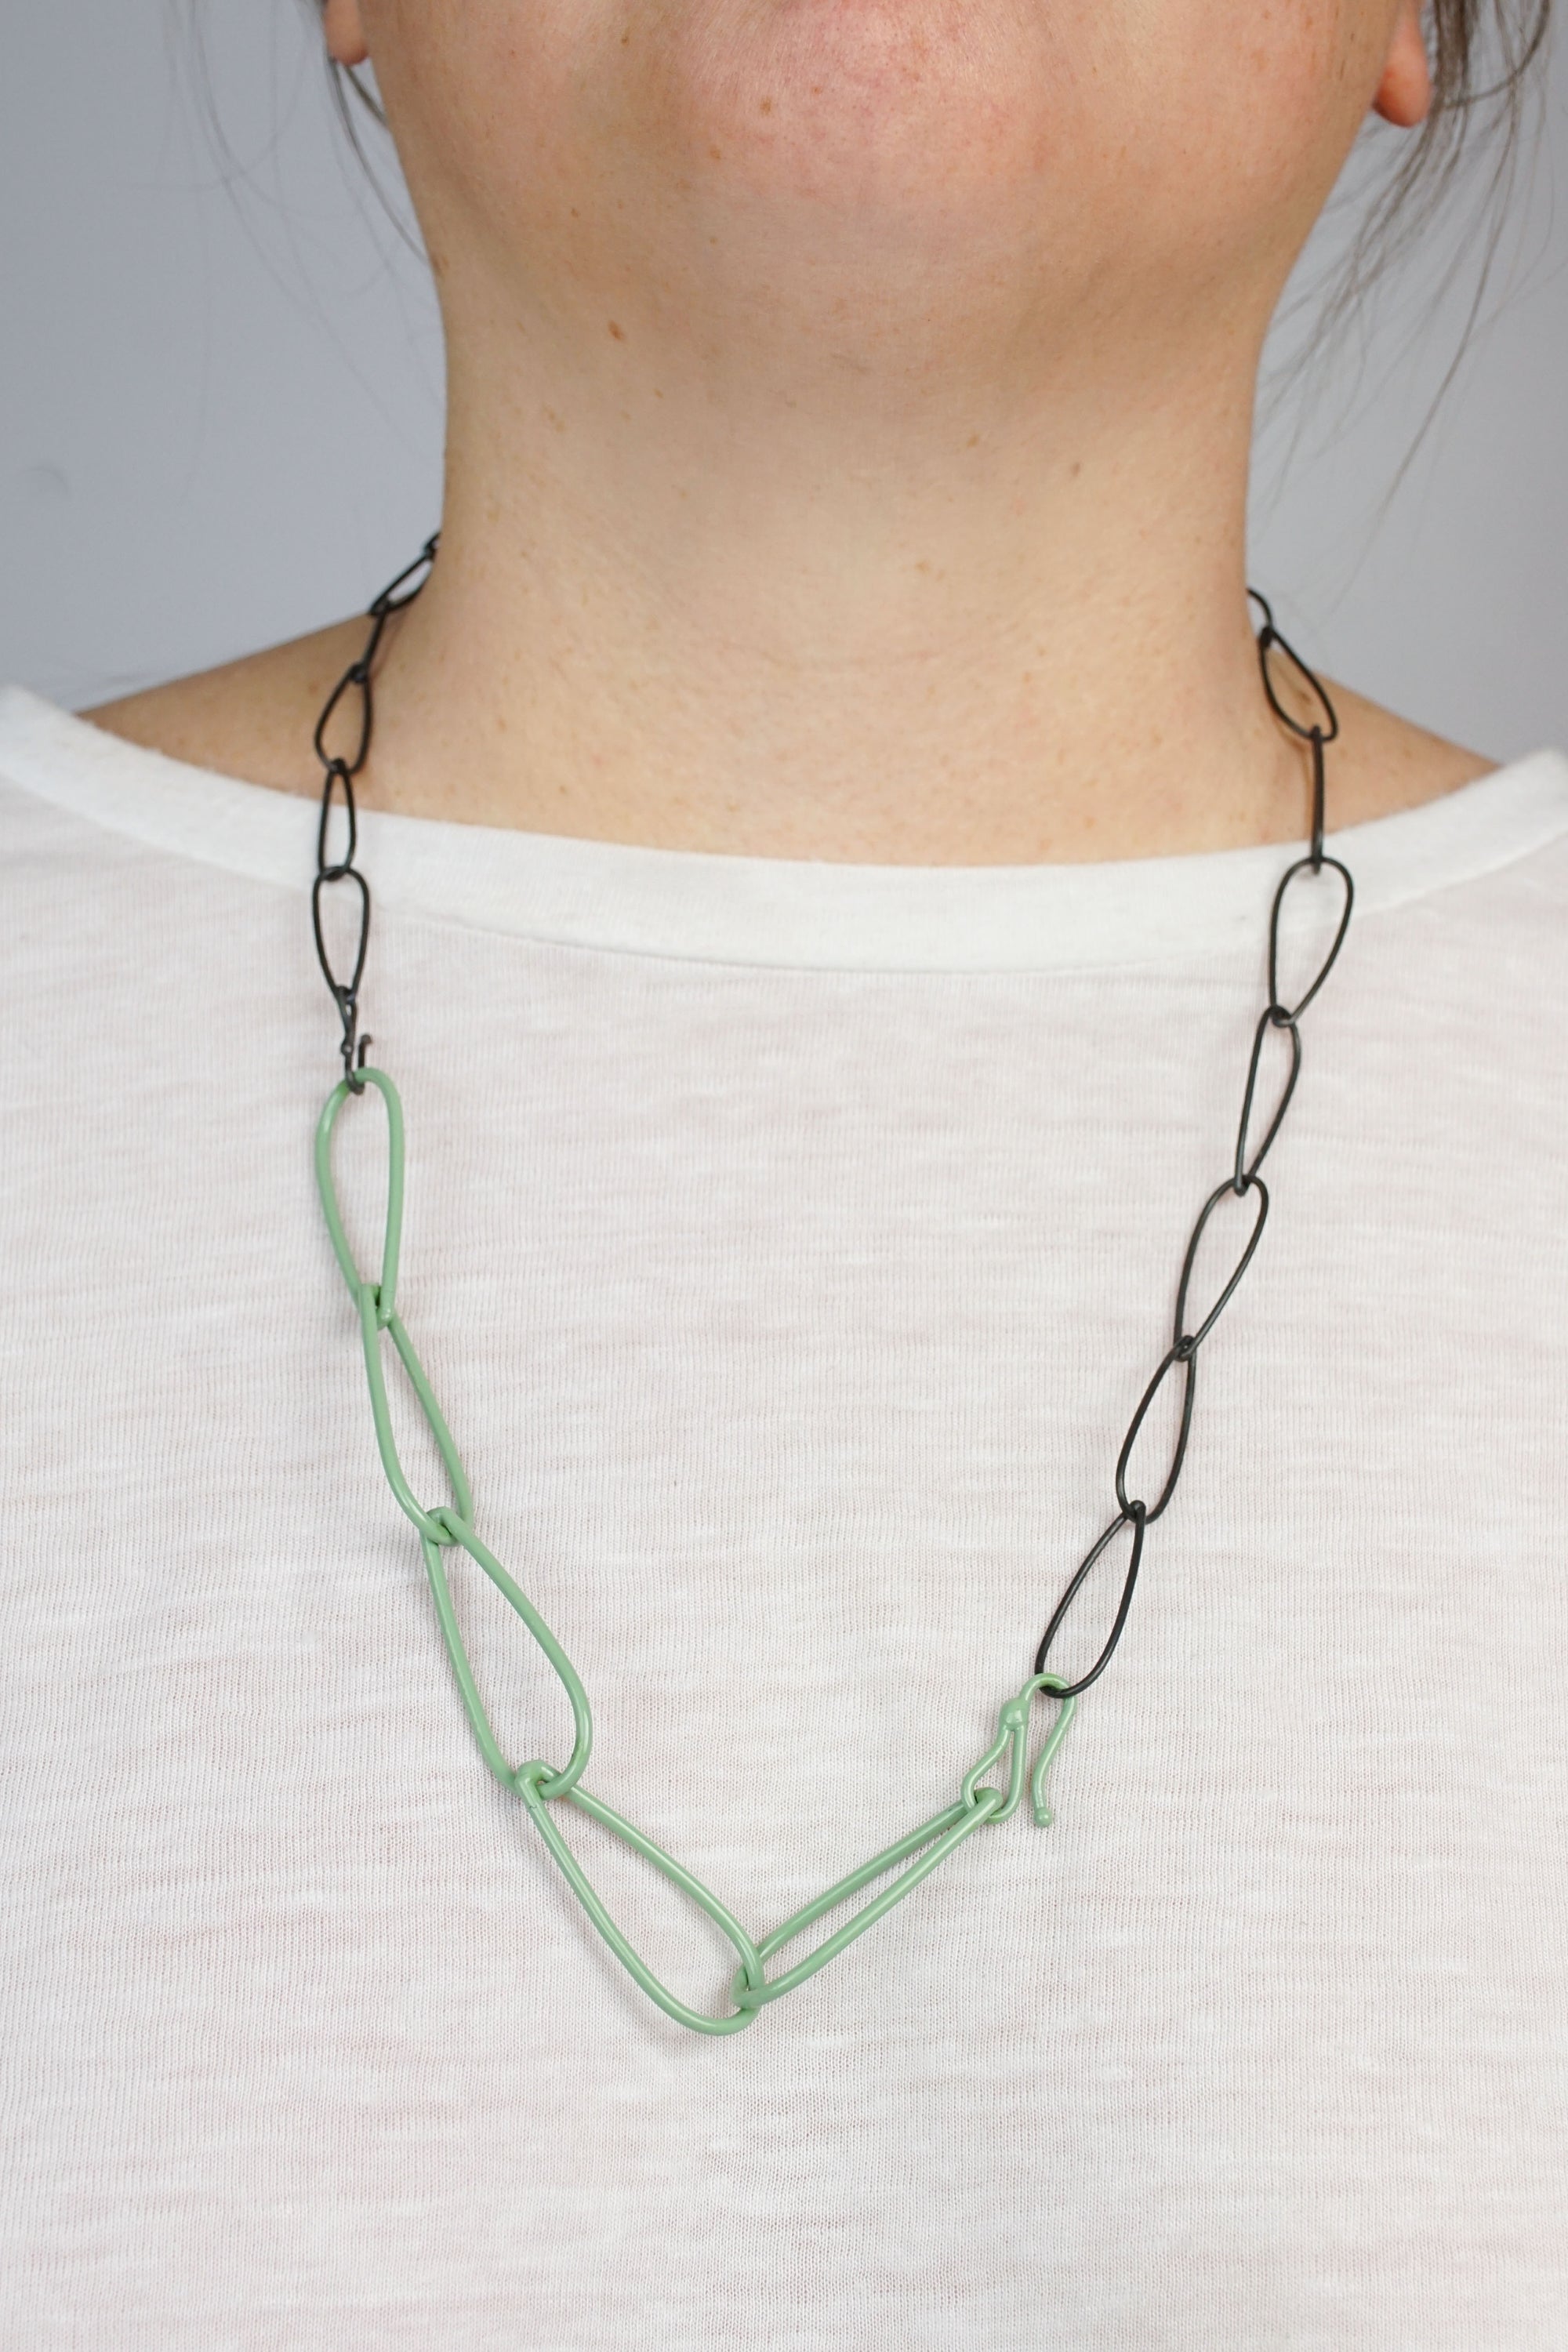 Modular Necklace in Steel and Pale Green